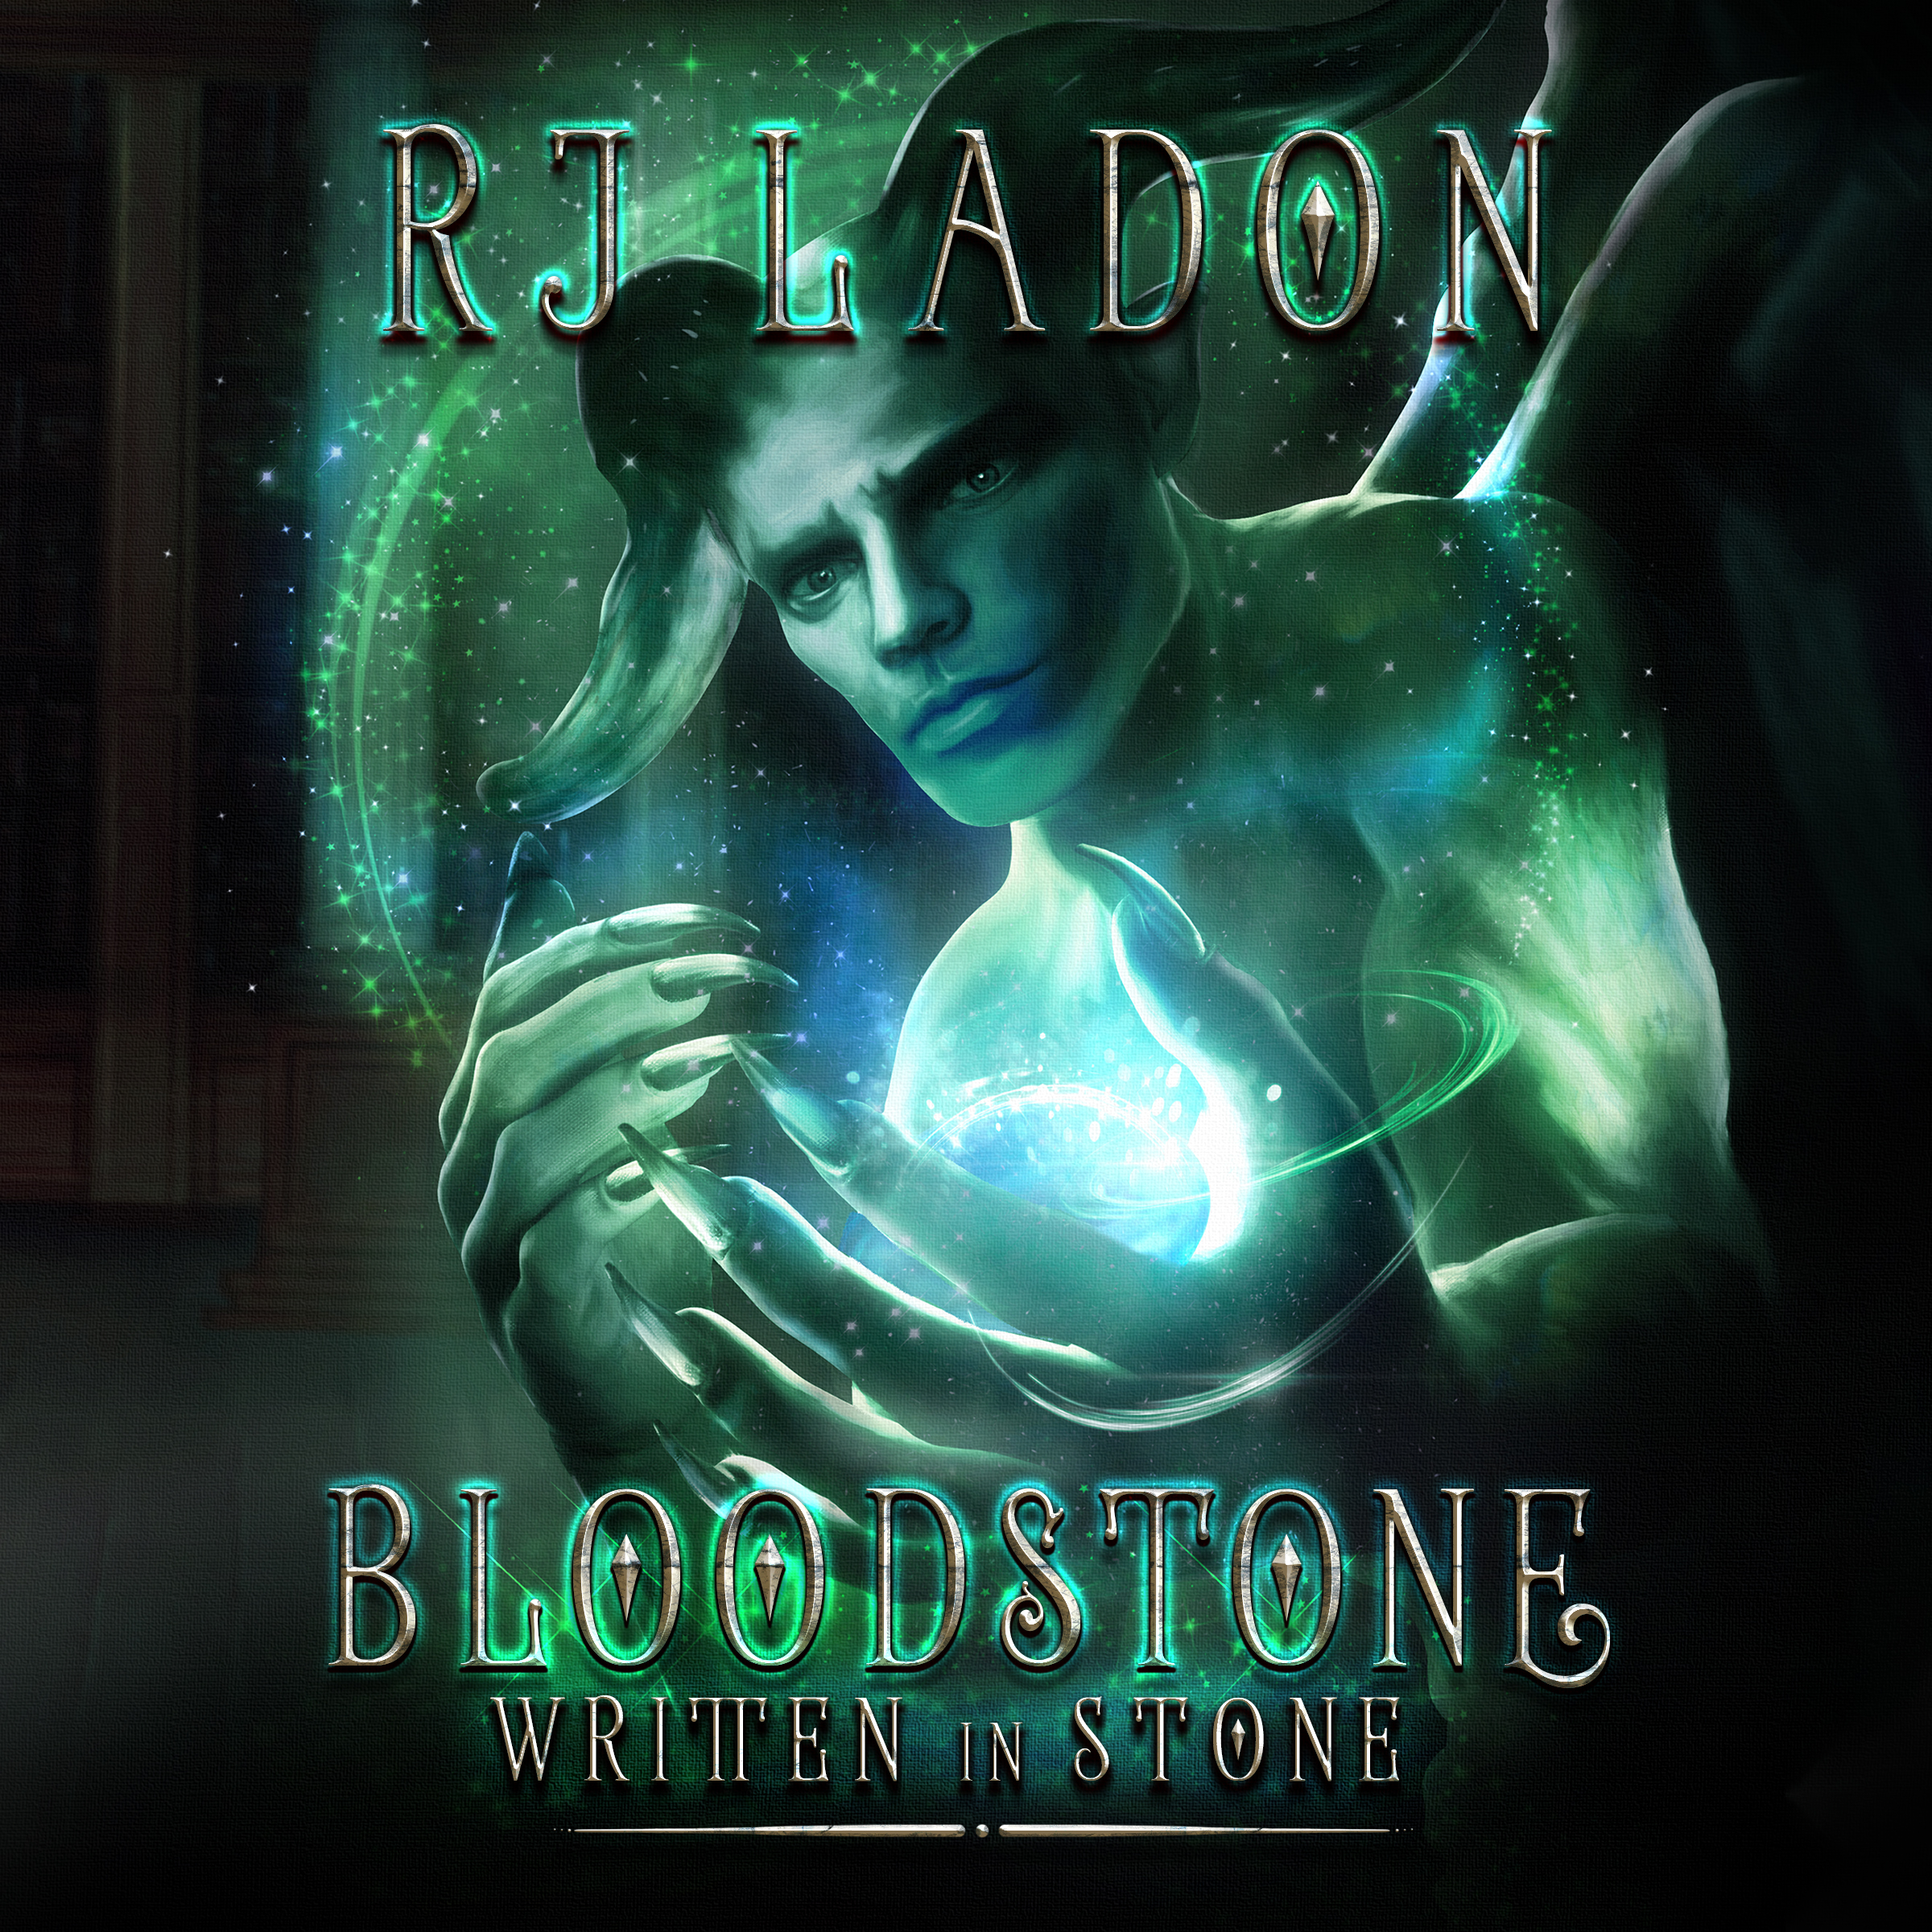 Need a Black Friday shopping idea? Bloodstone: Written in Stone by R.J. Ladon is out now!